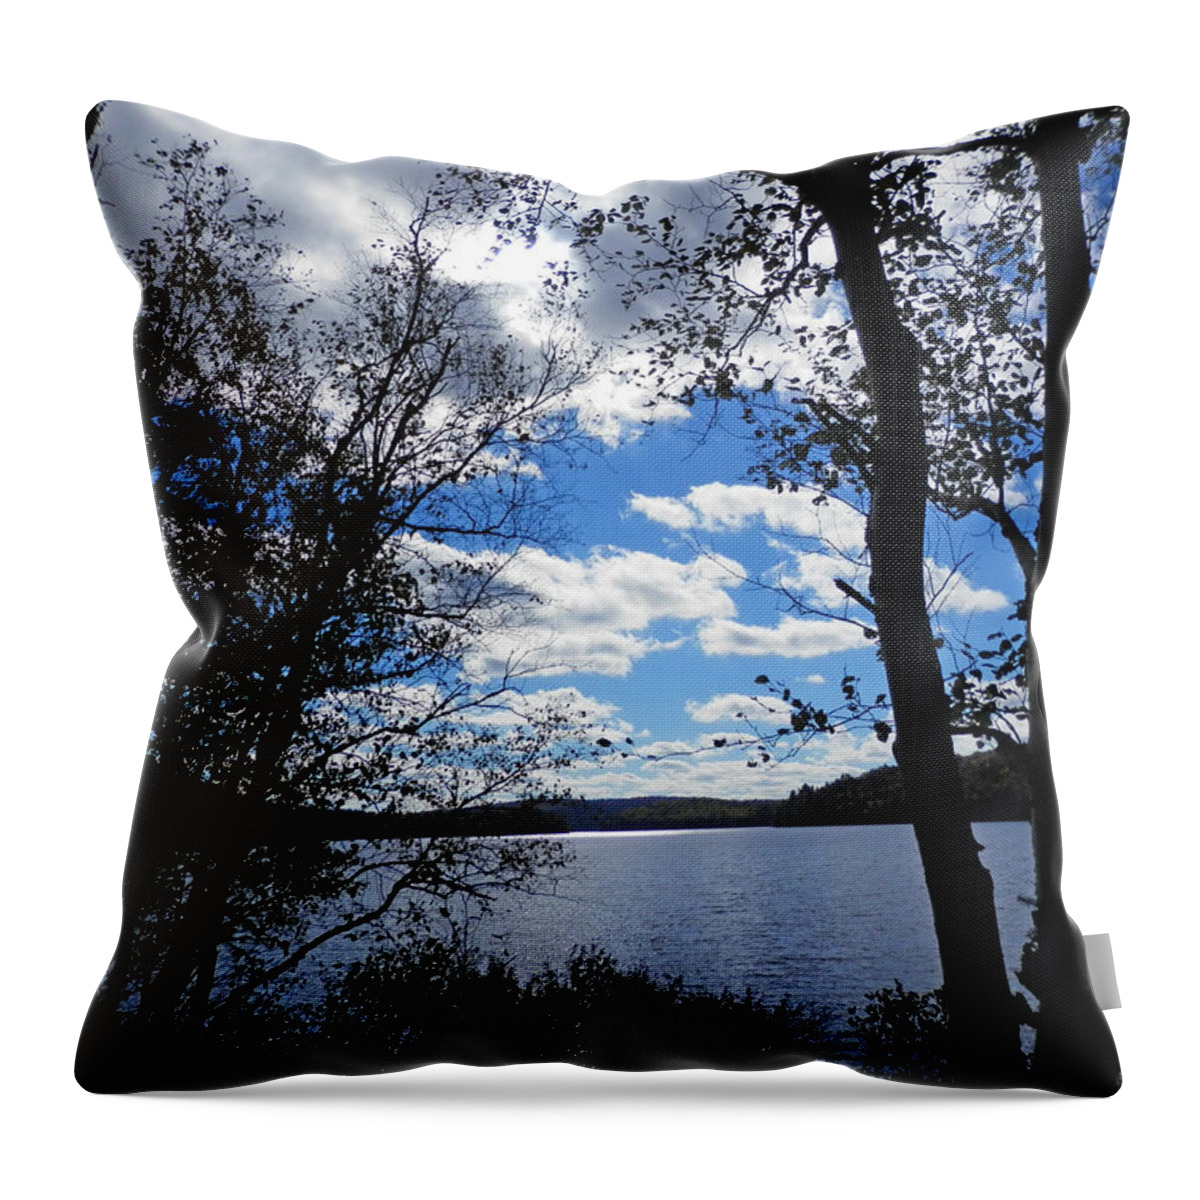 Silhouette Throw Pillow featuring the photograph Silhoutte 1 by Pema Hou